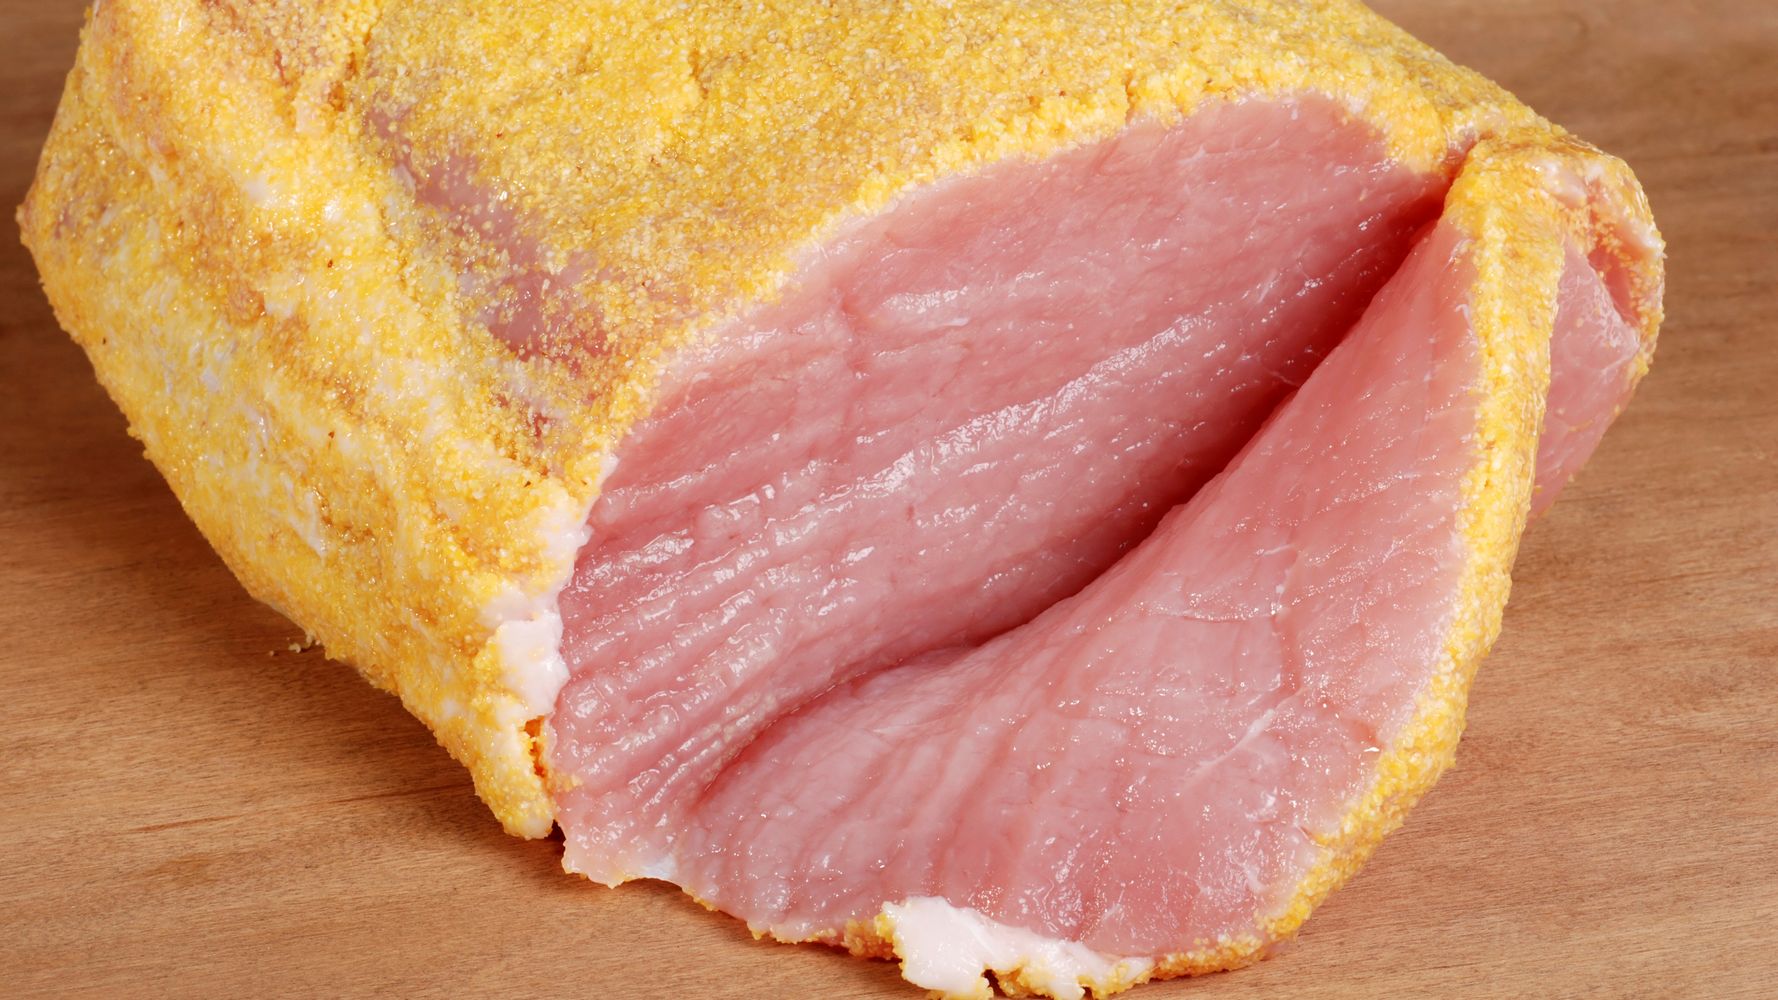 Canadians Don't Call It Canadian Bacon. Here's Their Name For It